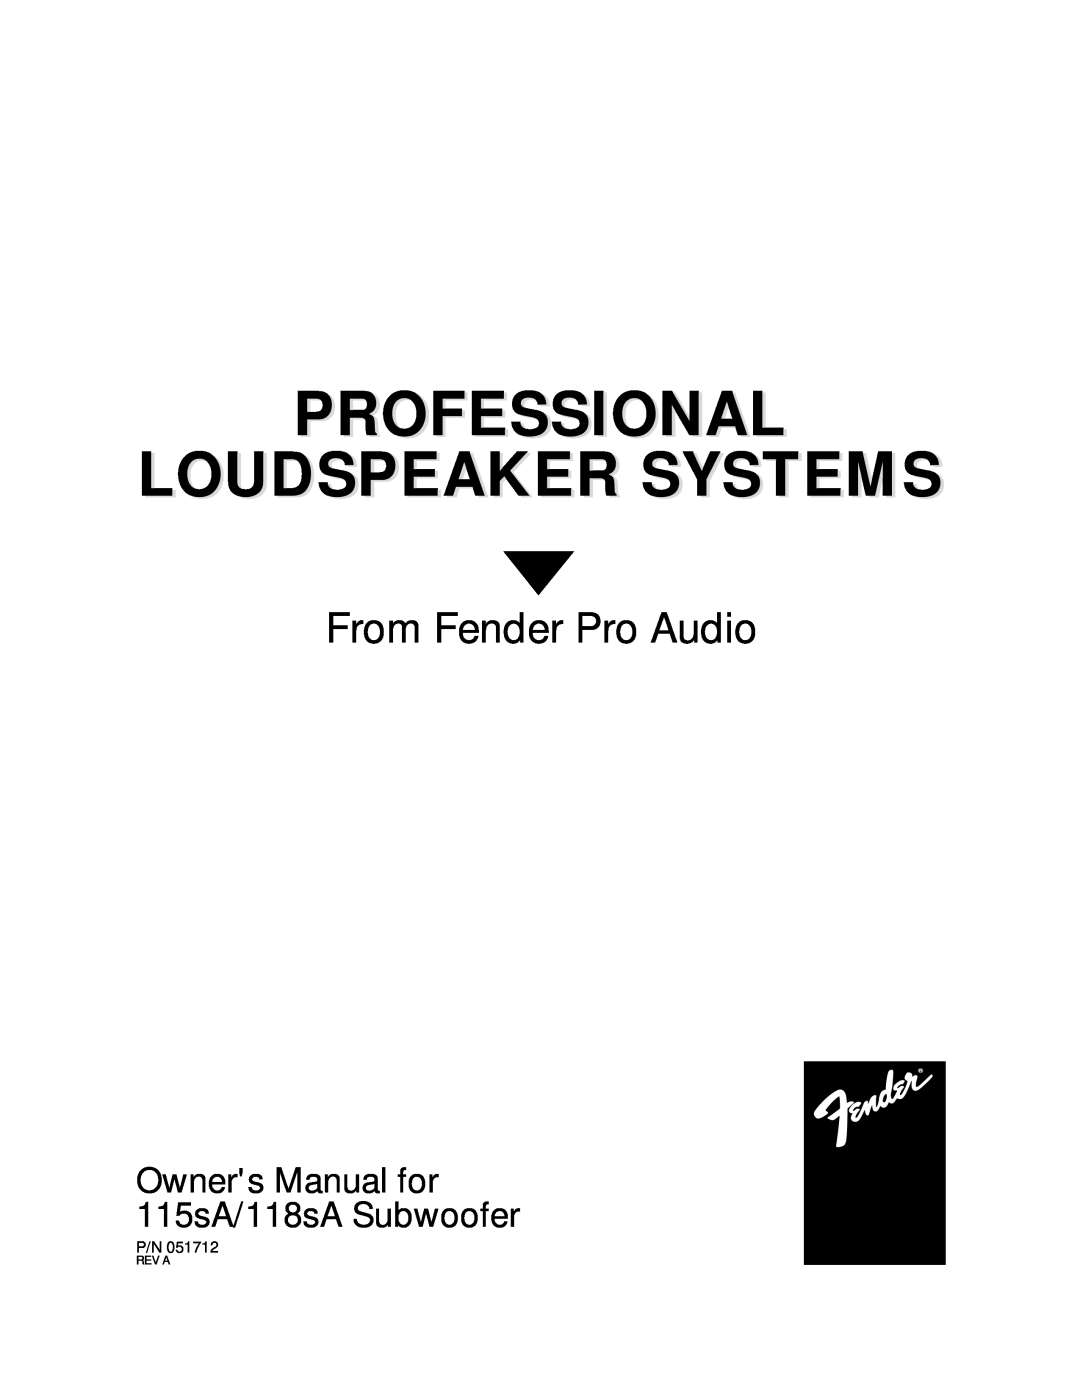 Fender 118SA, 115SA owner manual Professional Loudspeaker Systems, From Fender Pro Audio, Rev A 